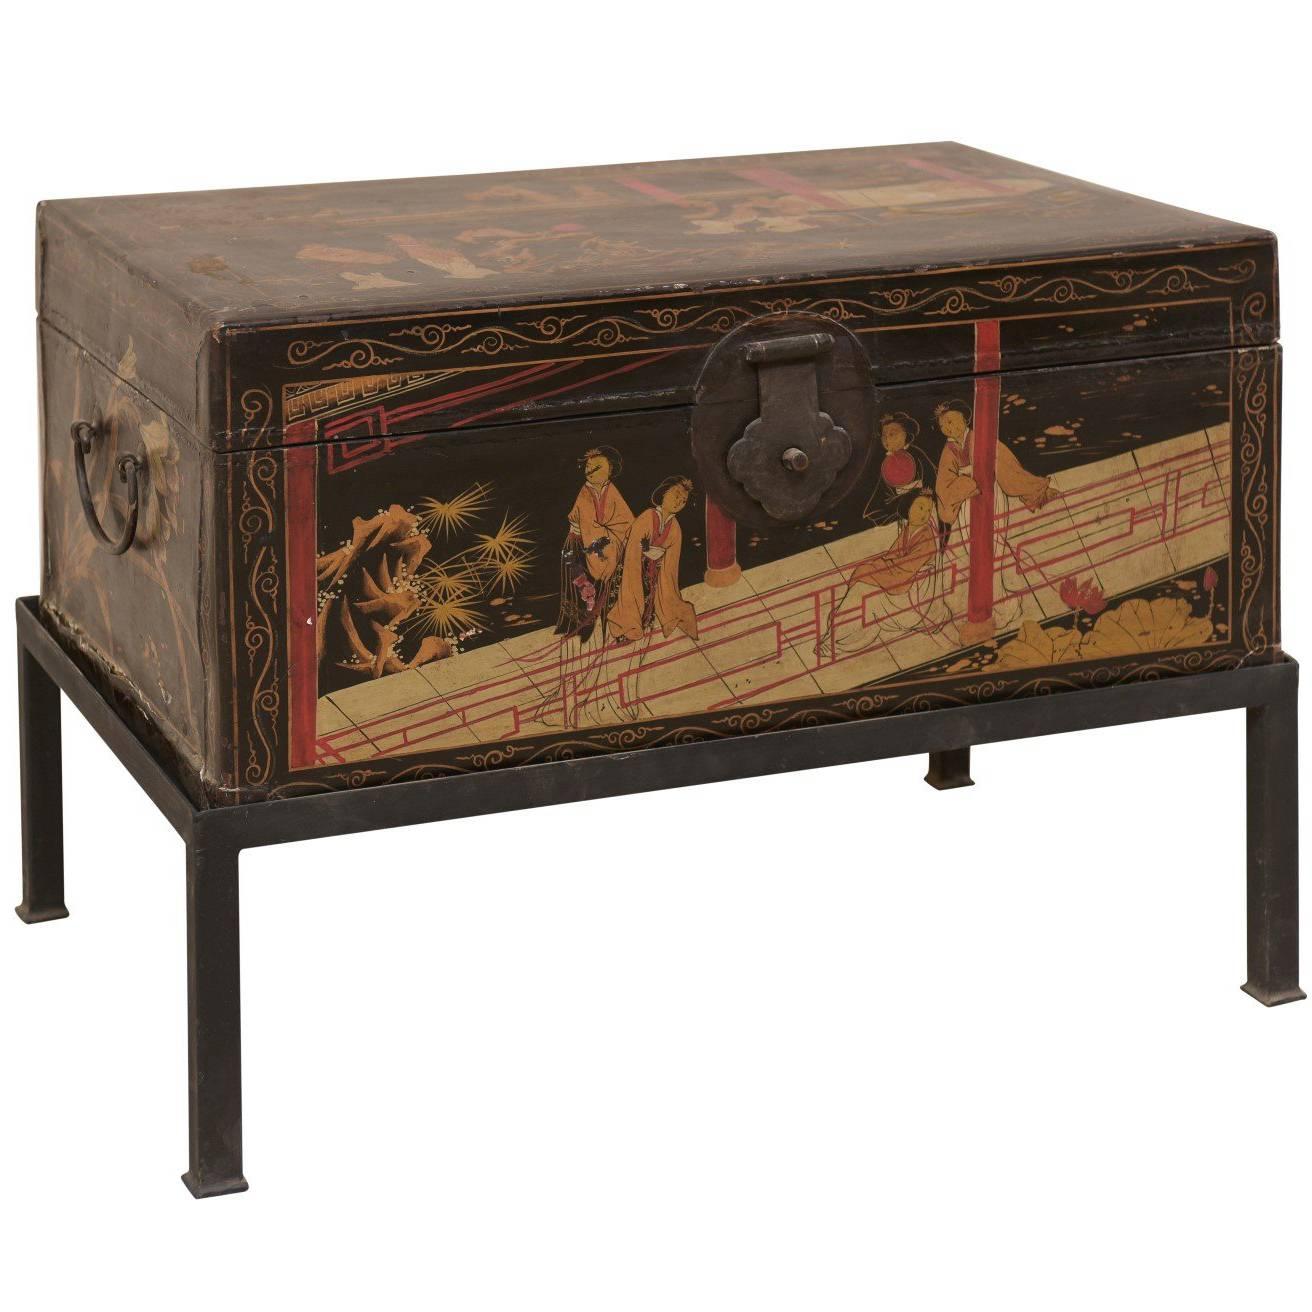 19th Century Chinese Painted Leather Trunk Made Unique Table with Custom Base